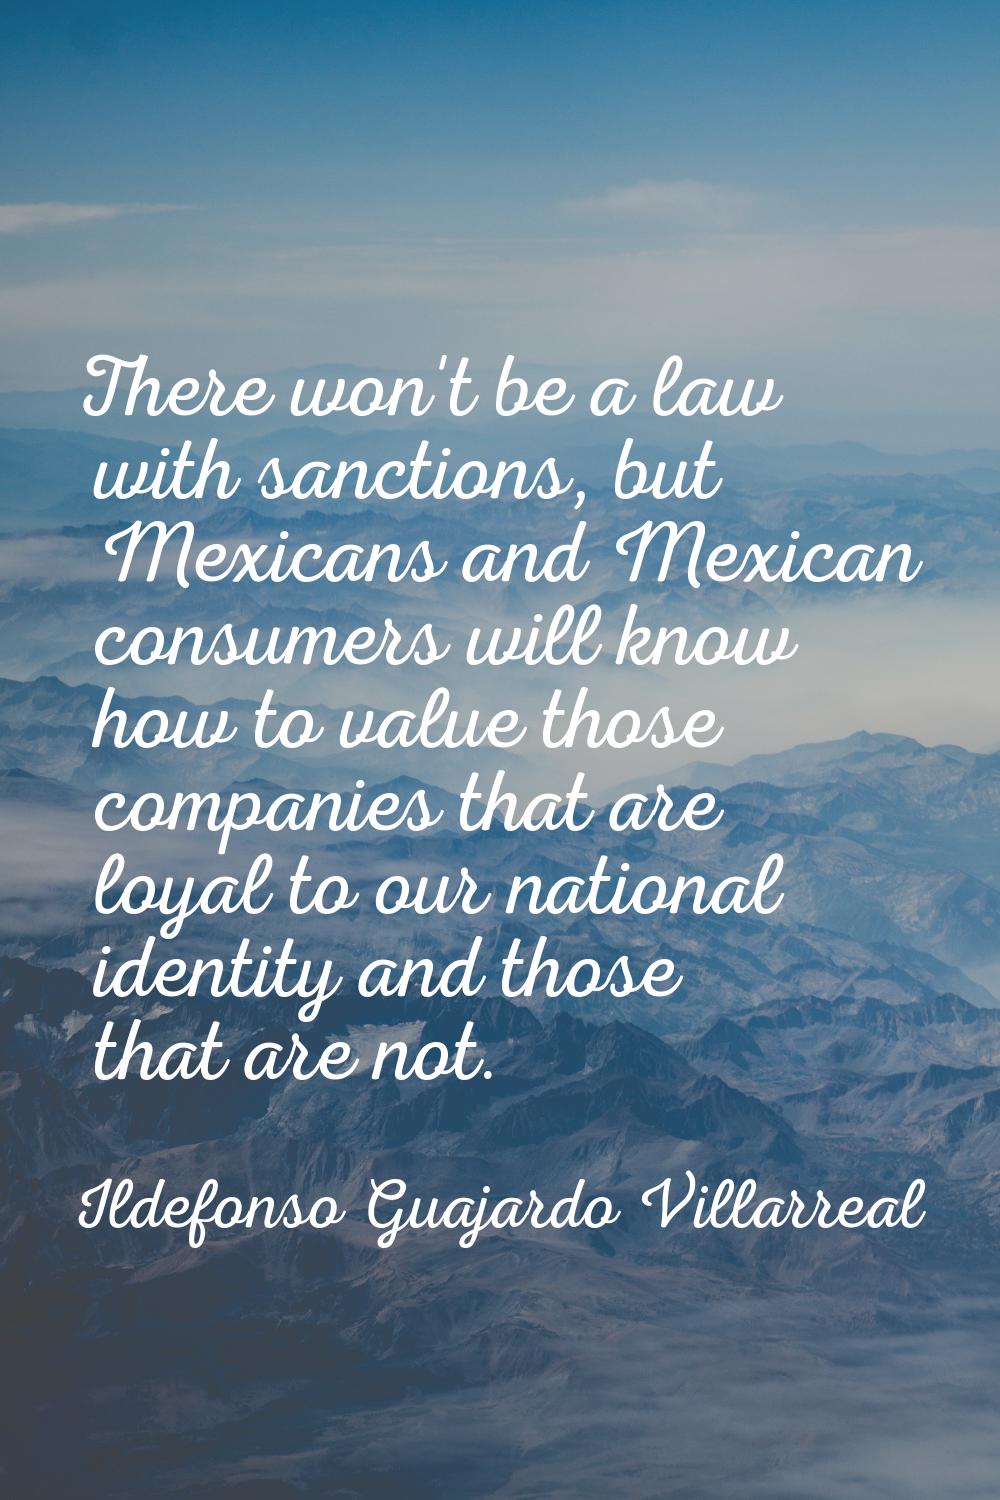 There won't be a law with sanctions, but Mexicans and Mexican consumers will know how to value thos